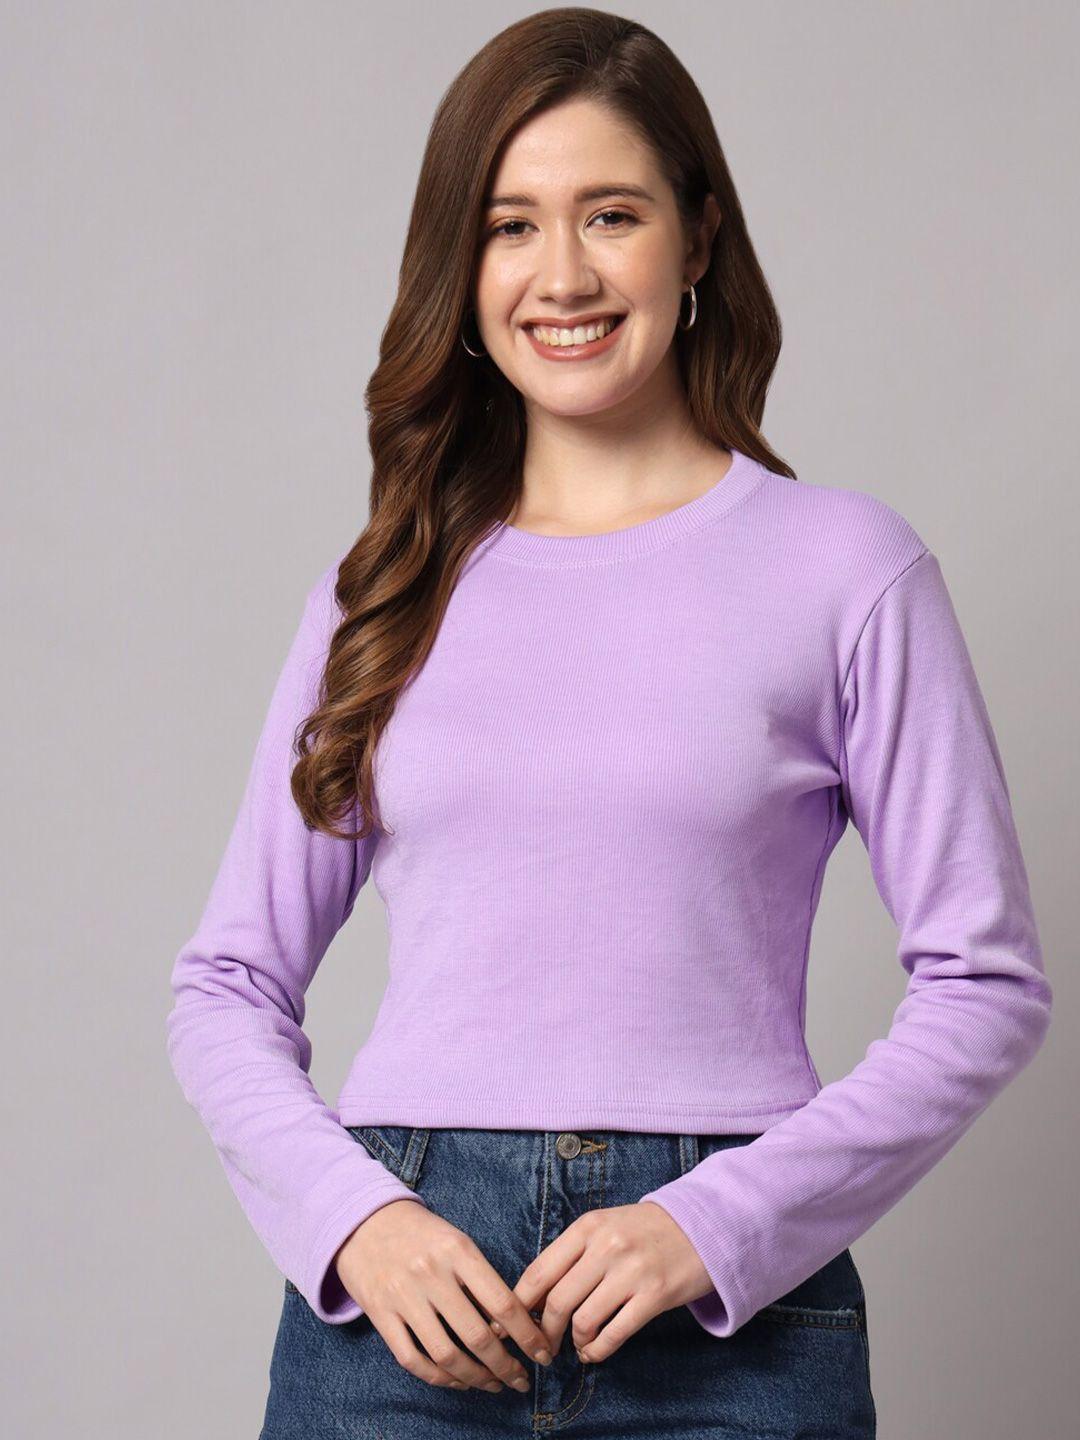 funday fashion round neck long sleeves top